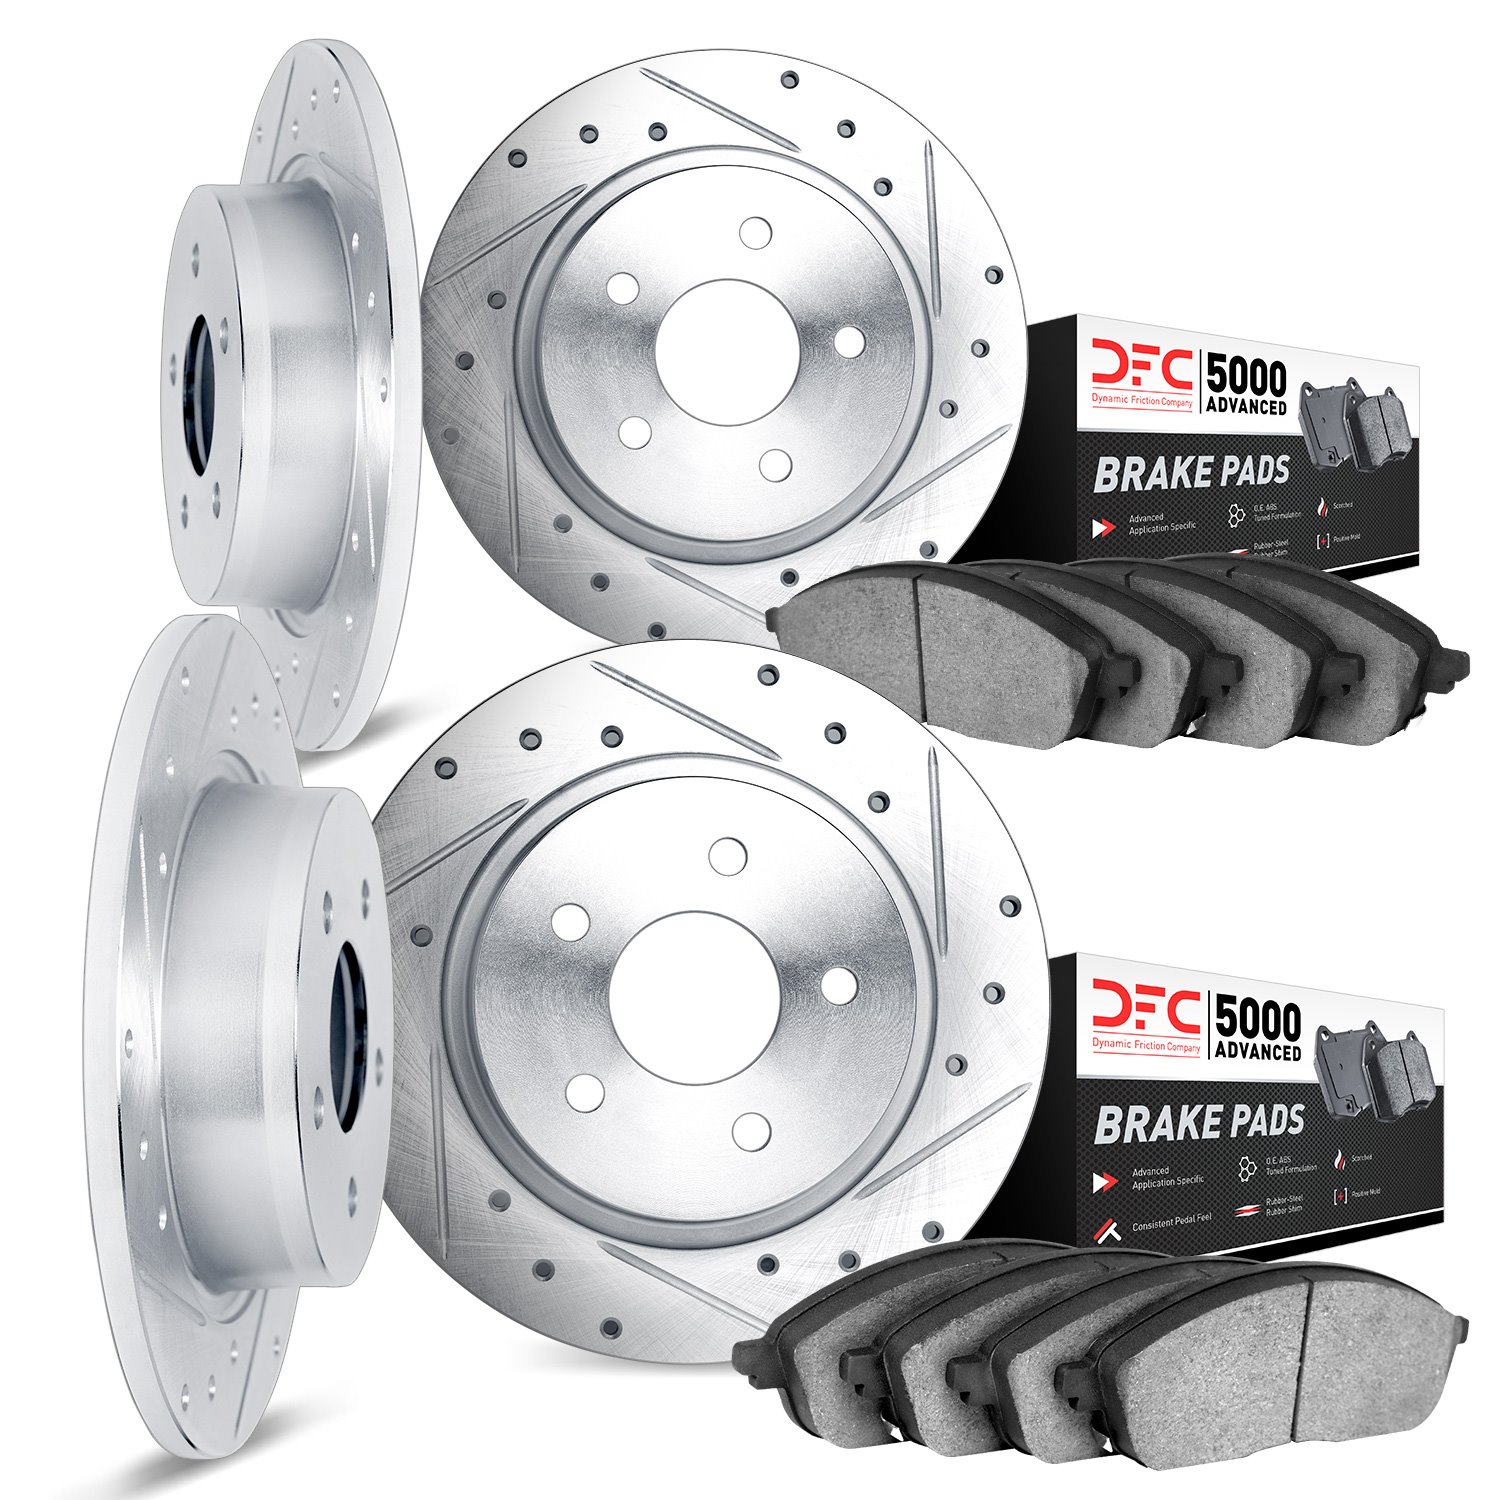 7504-63002 Drilled/Slotted Brake Rotors w/5000 Advanced Brake Pads Kit [Silver], 1961-1963 Mercedes-Benz, Position: Front and Re